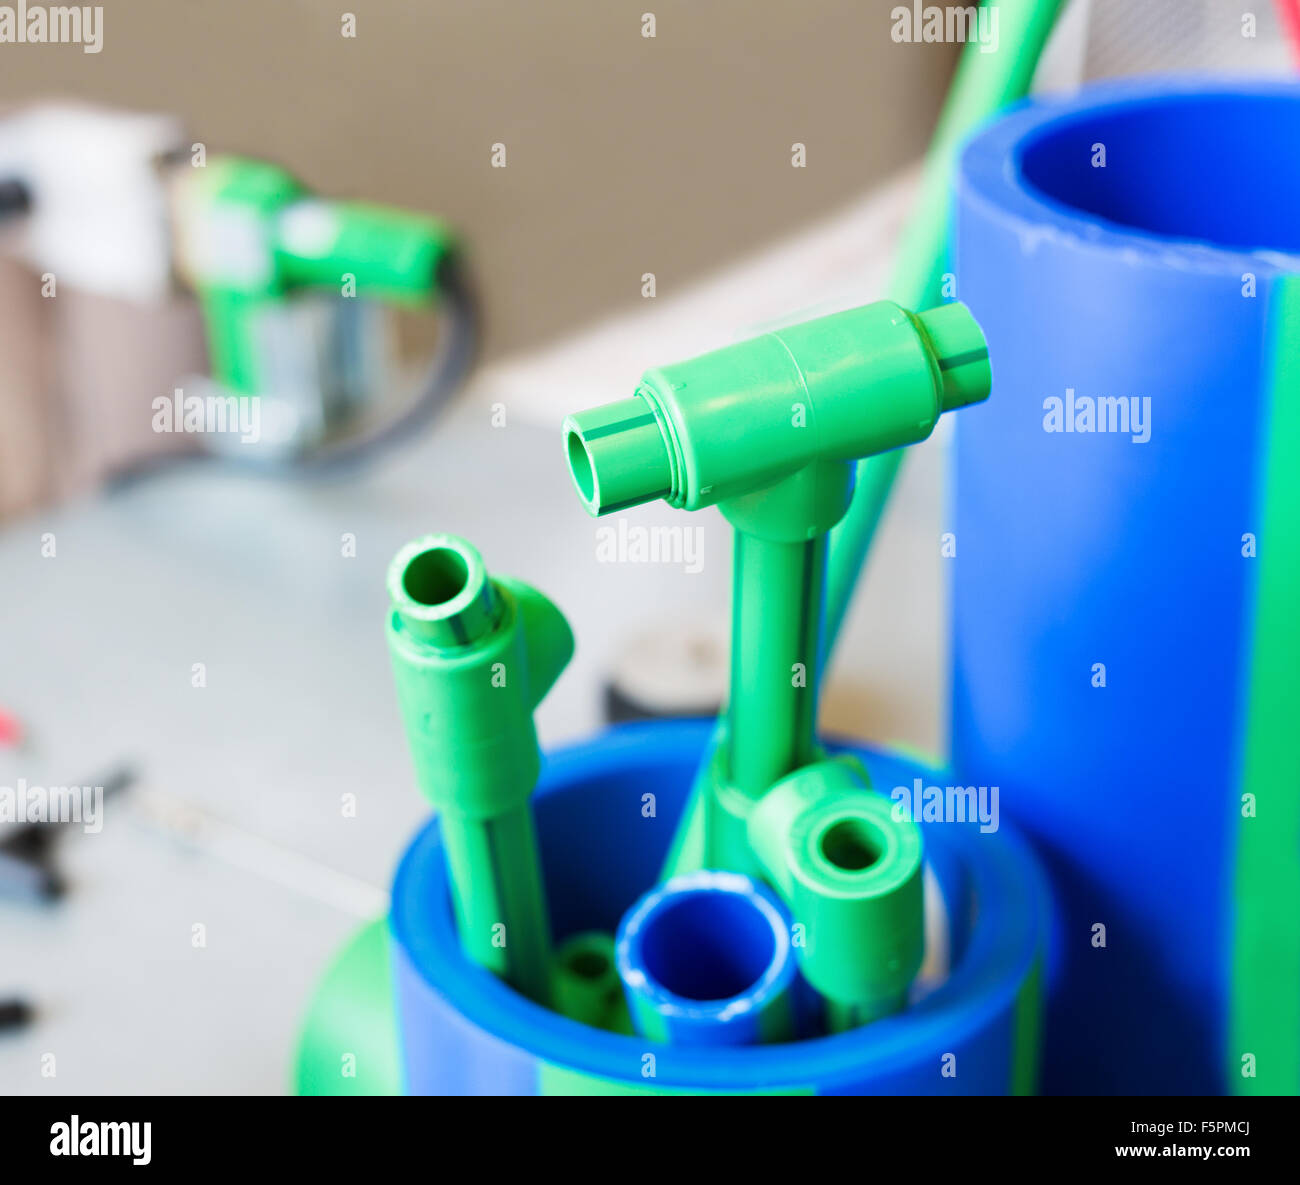 Samples of polymer pipes and fittings Stock Photo